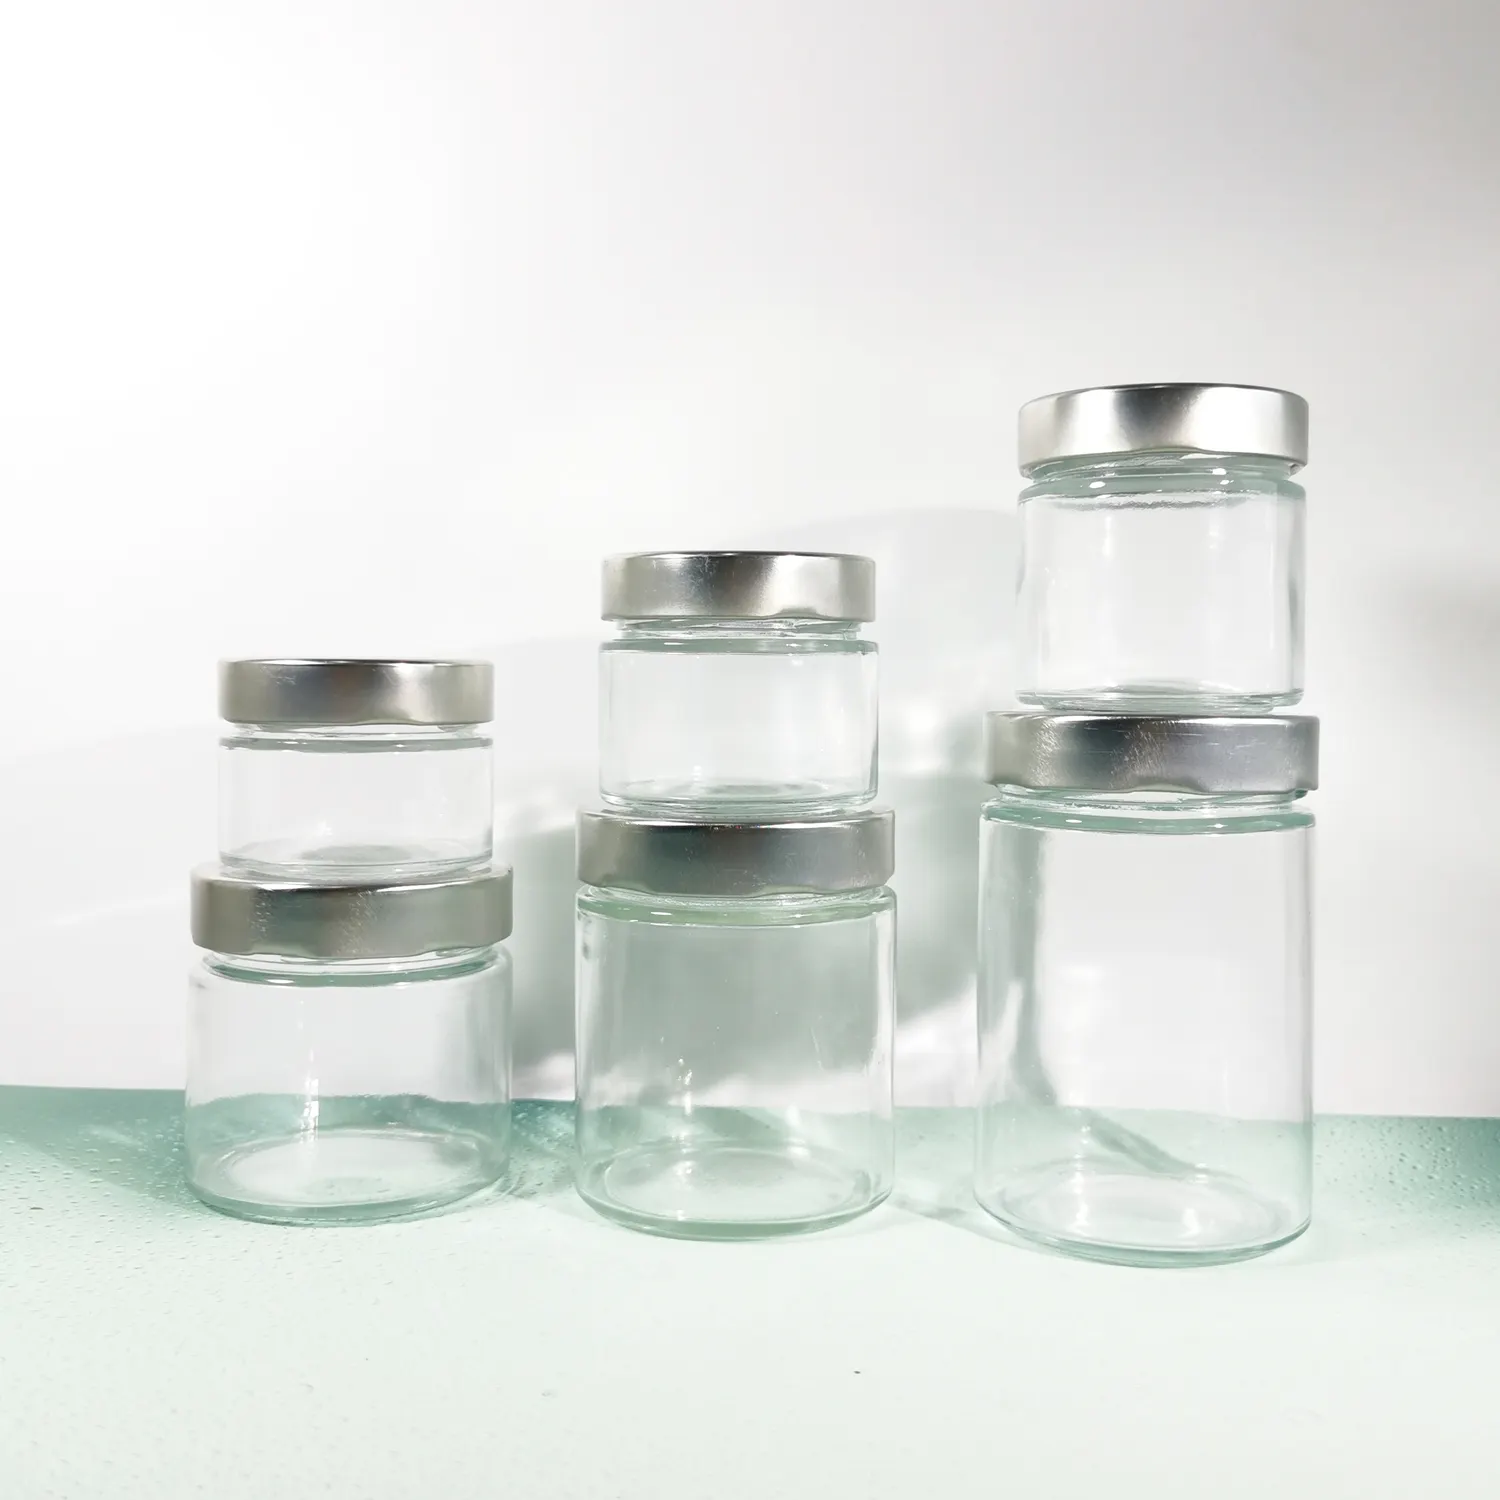 100ml 280ml 500ml Glass Containers Spice Storage Jar For Food Candy Coffee Glass Mason Jar With Metal Lid